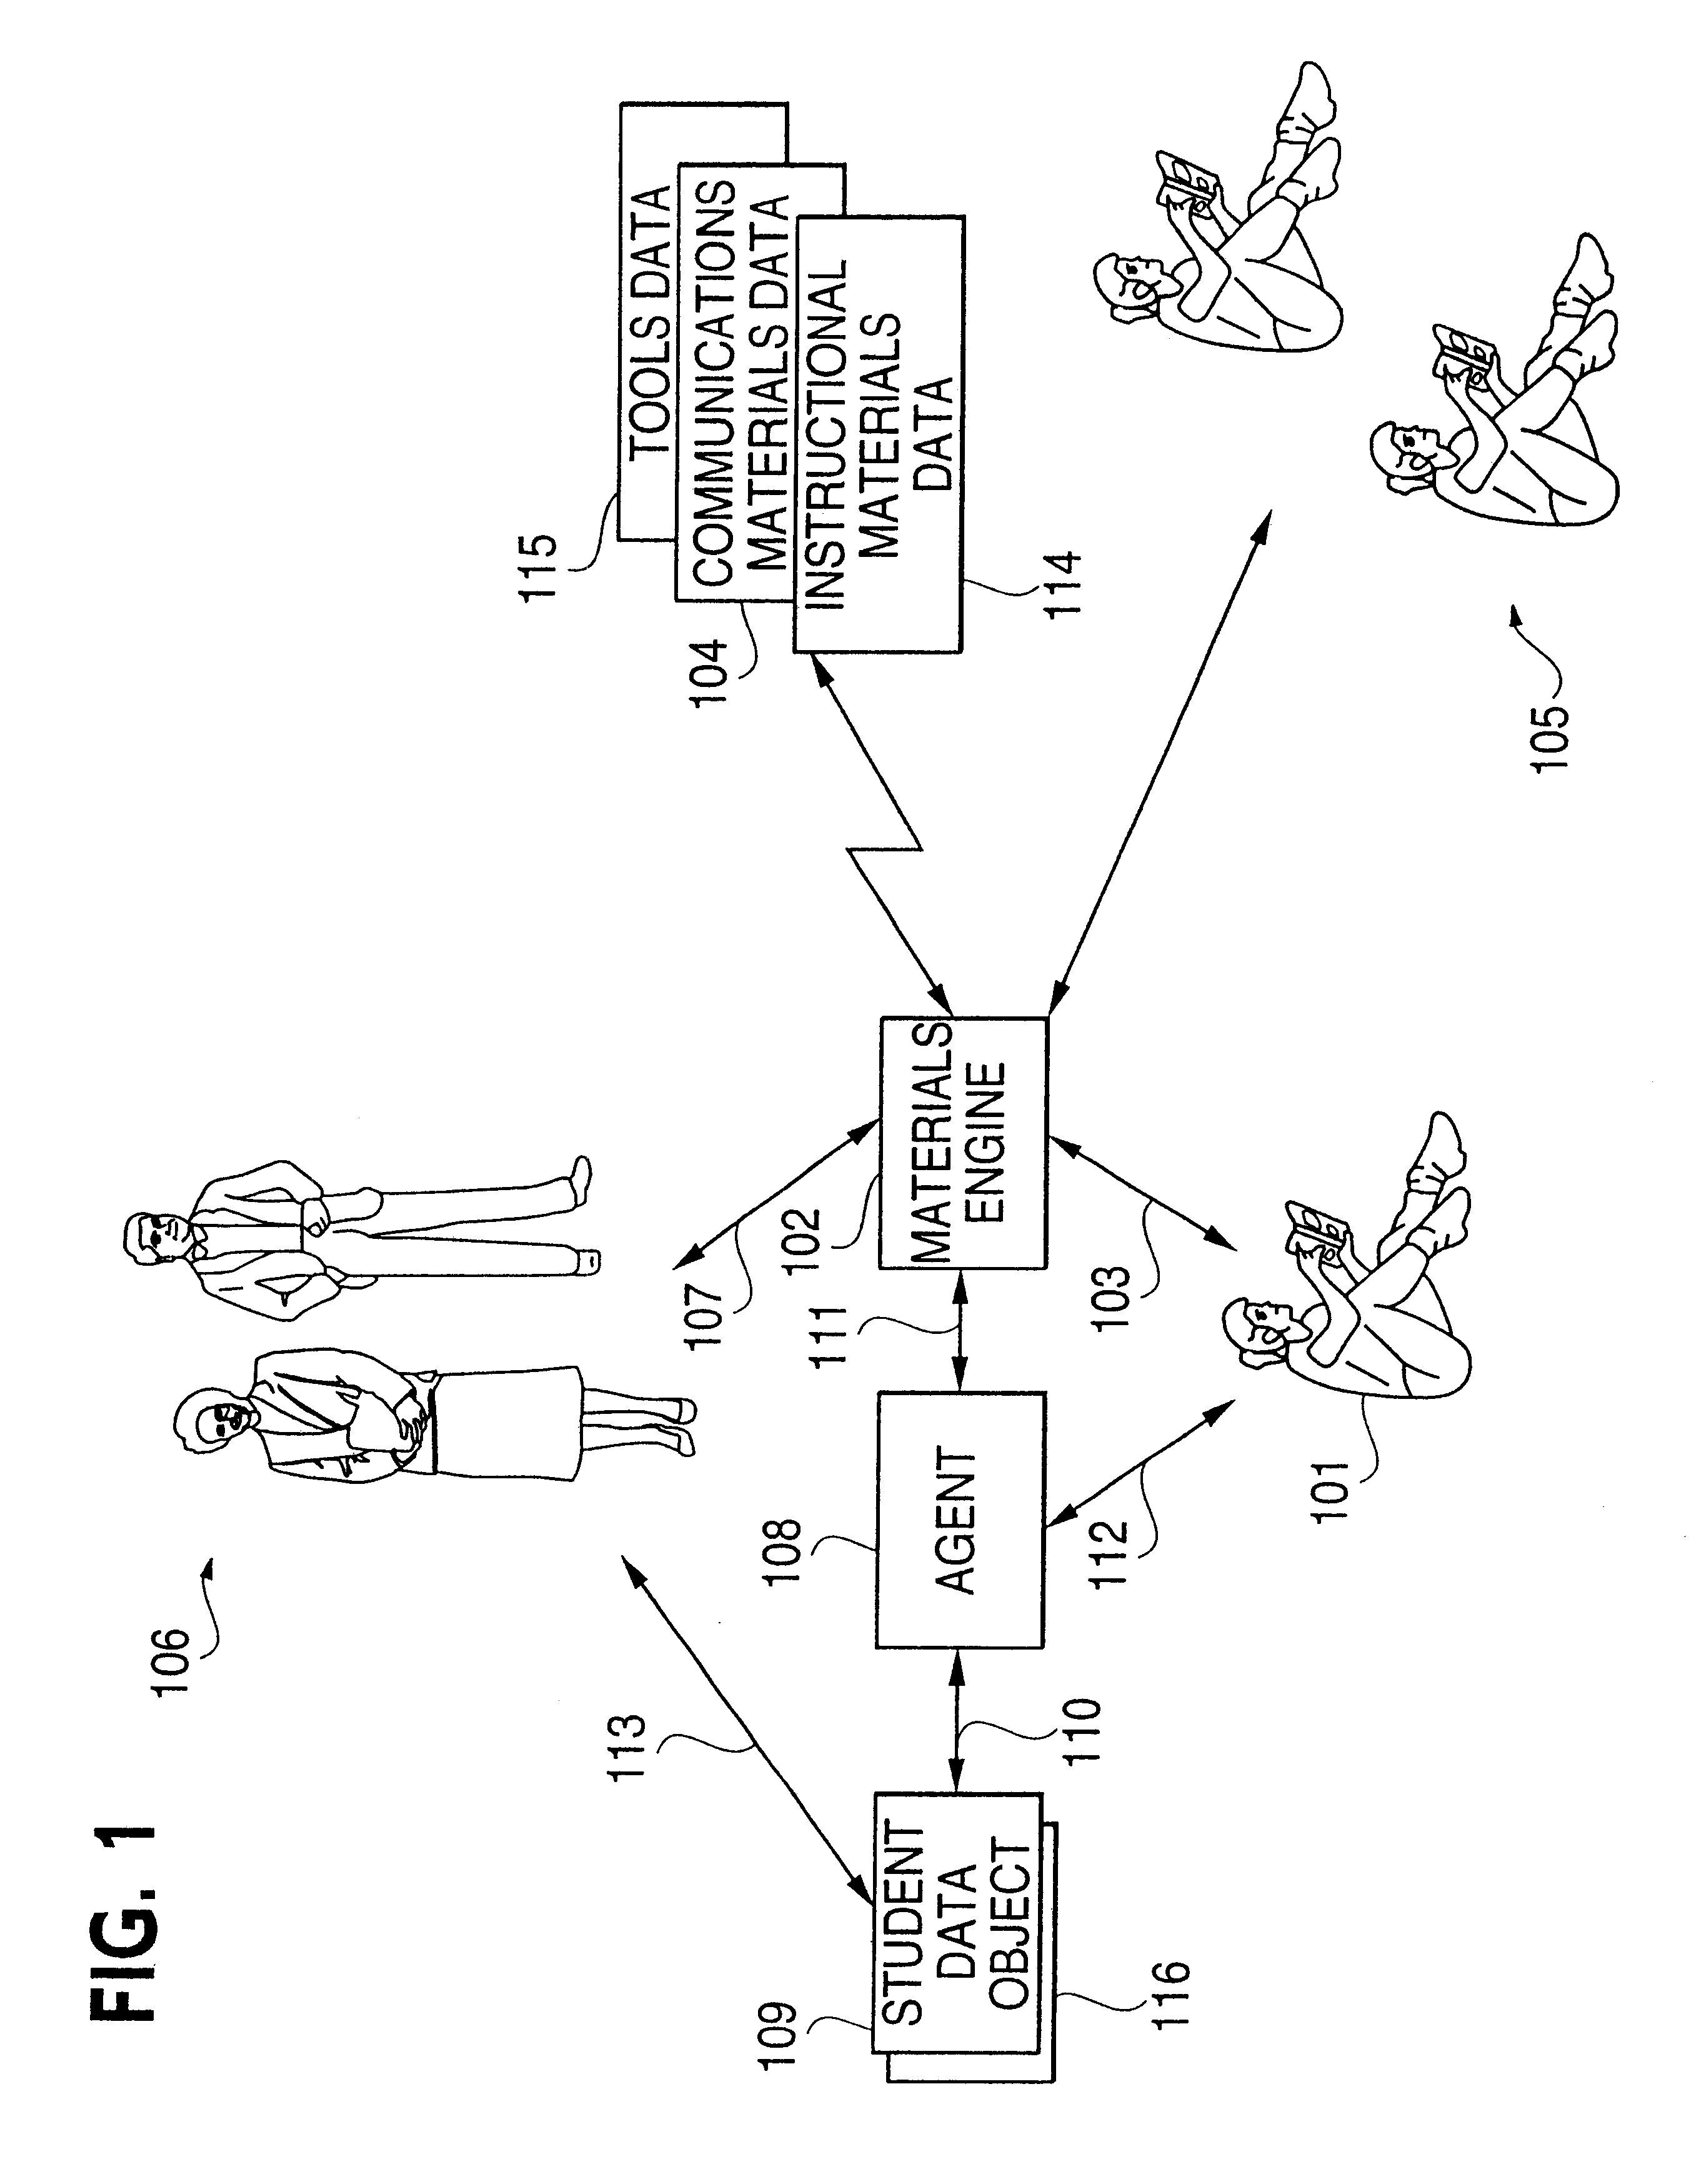 Agent based instruction system and method